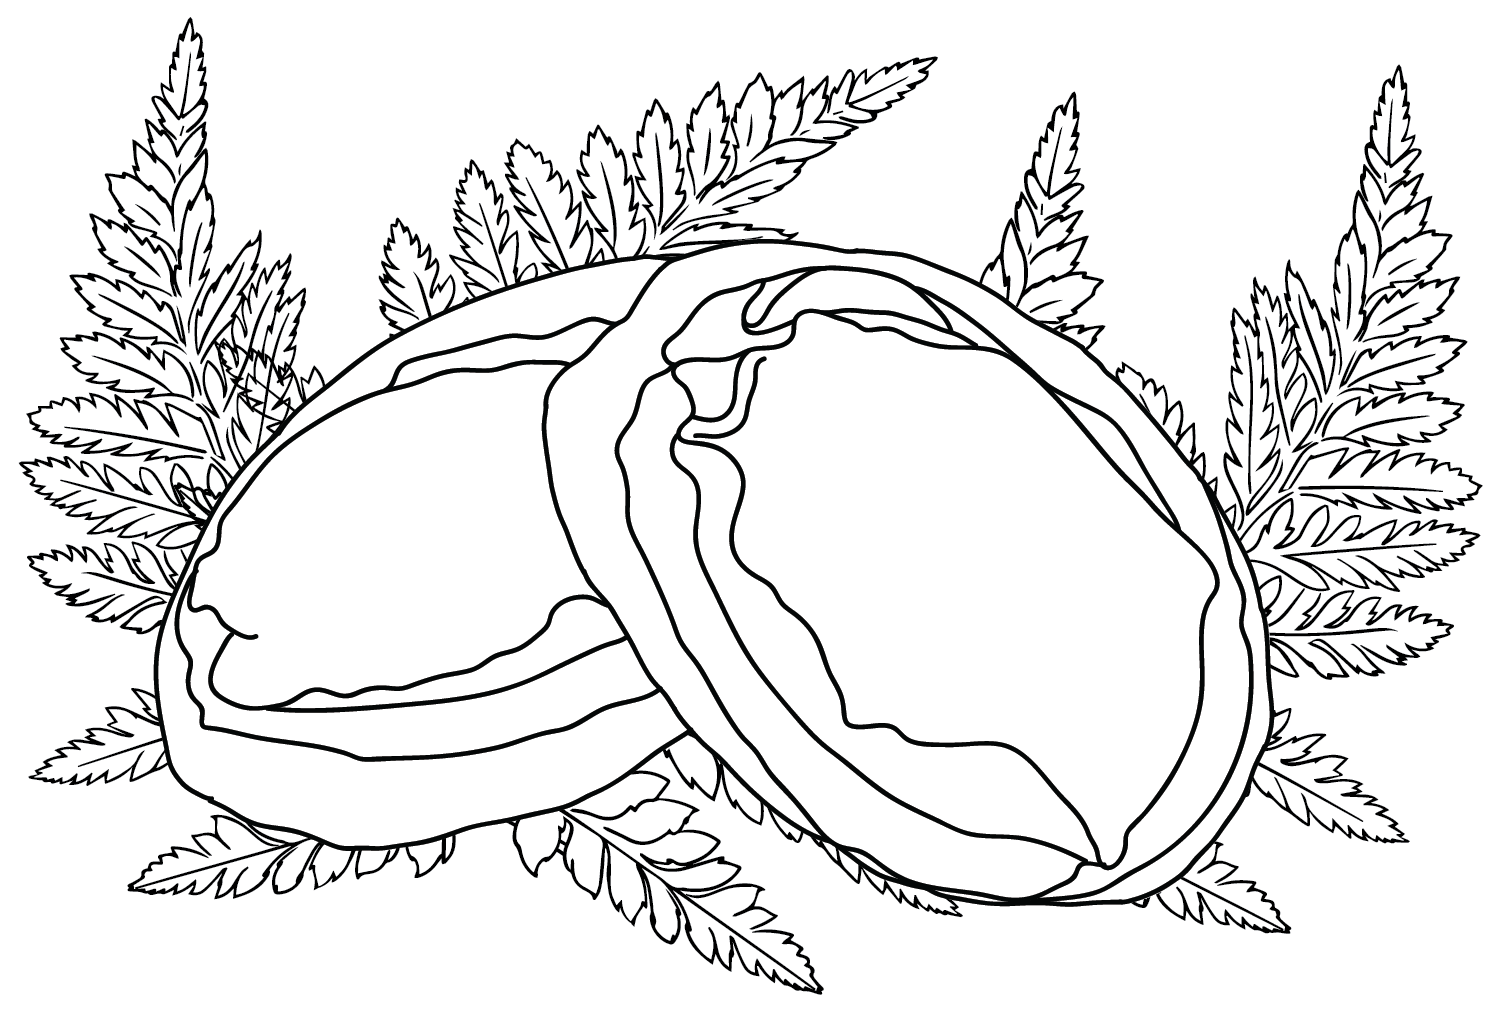 Abalone Coloring Page from Abalone